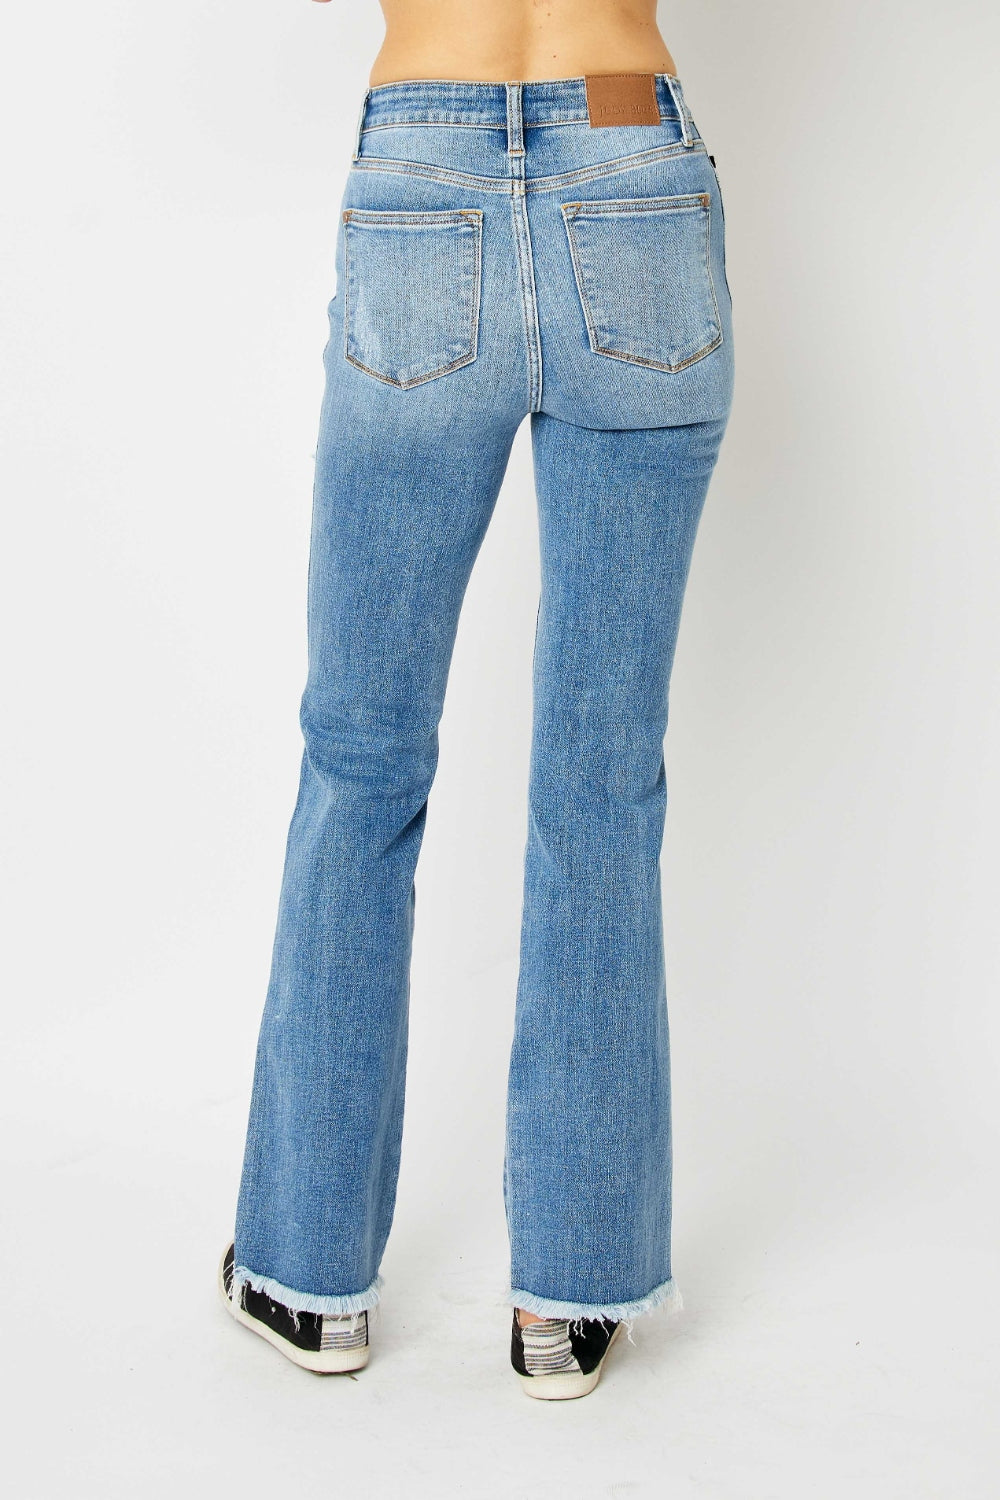 Model wearing light wash women's ripped bootcut jeans with distressed details